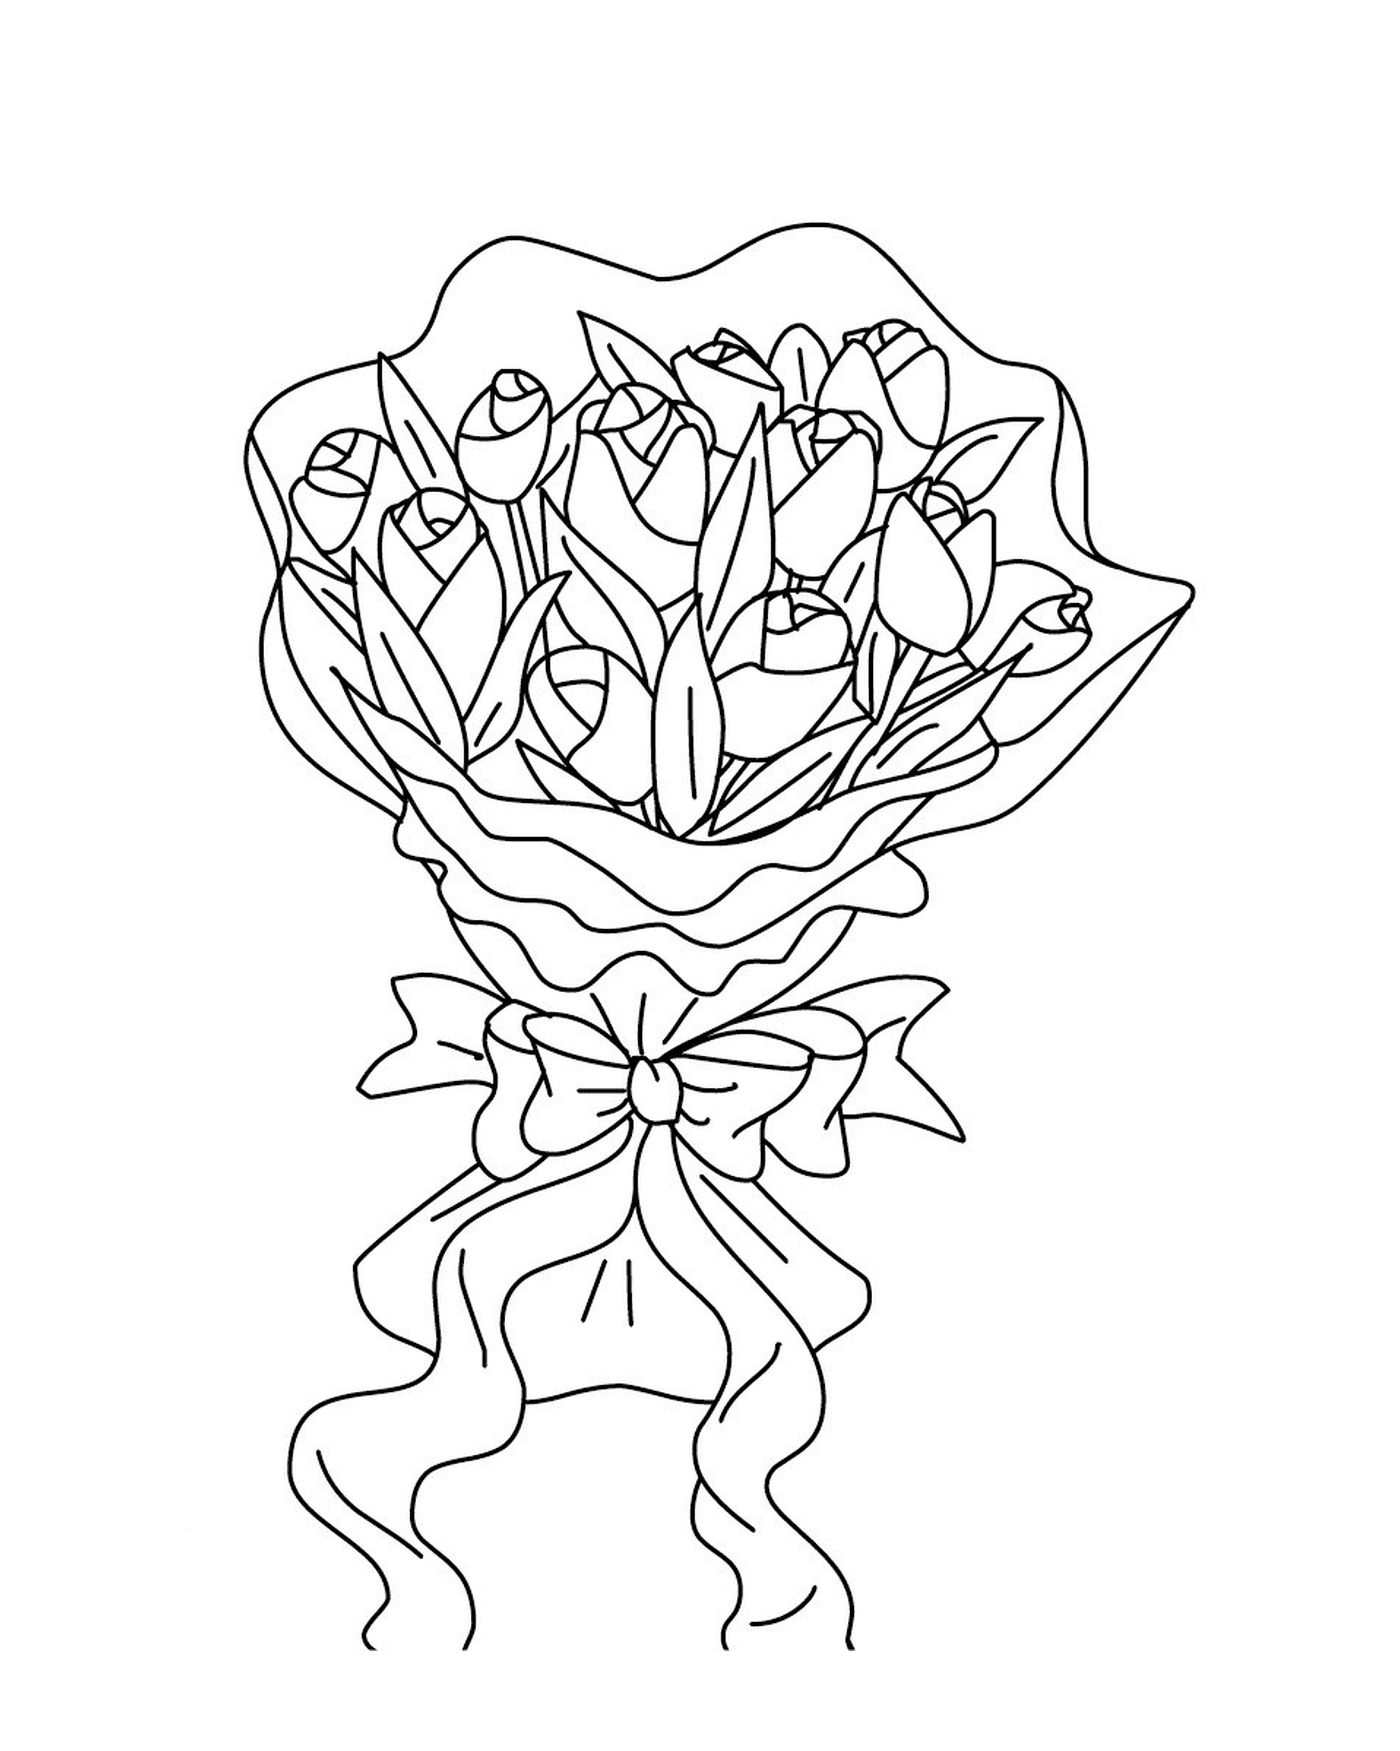  A bouquet of flowers tied with a knot 